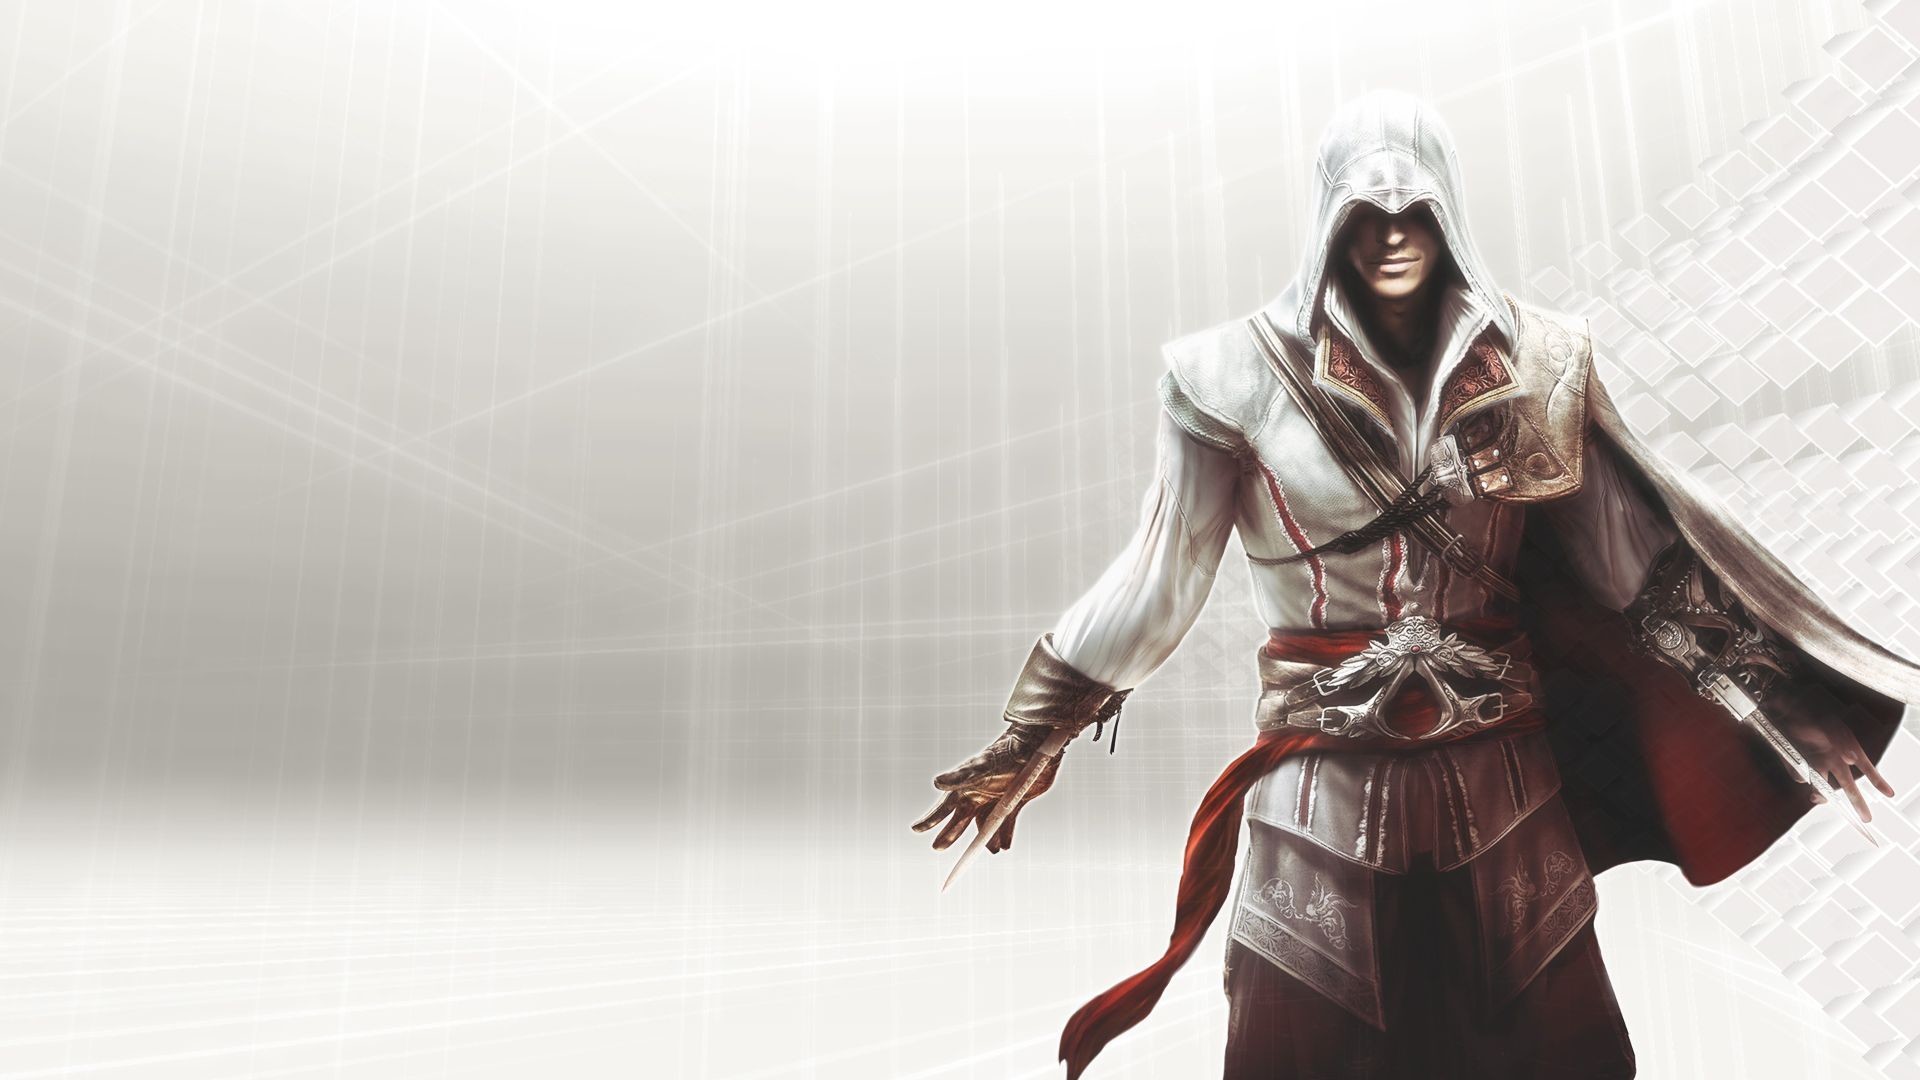 1920x1080 Assassins Creed HD Wallpapers and Backgrounds 1920Ã1080 Assassin's Creed  Wallpaper (27 Wallpapers) | Adorable Wallpapers